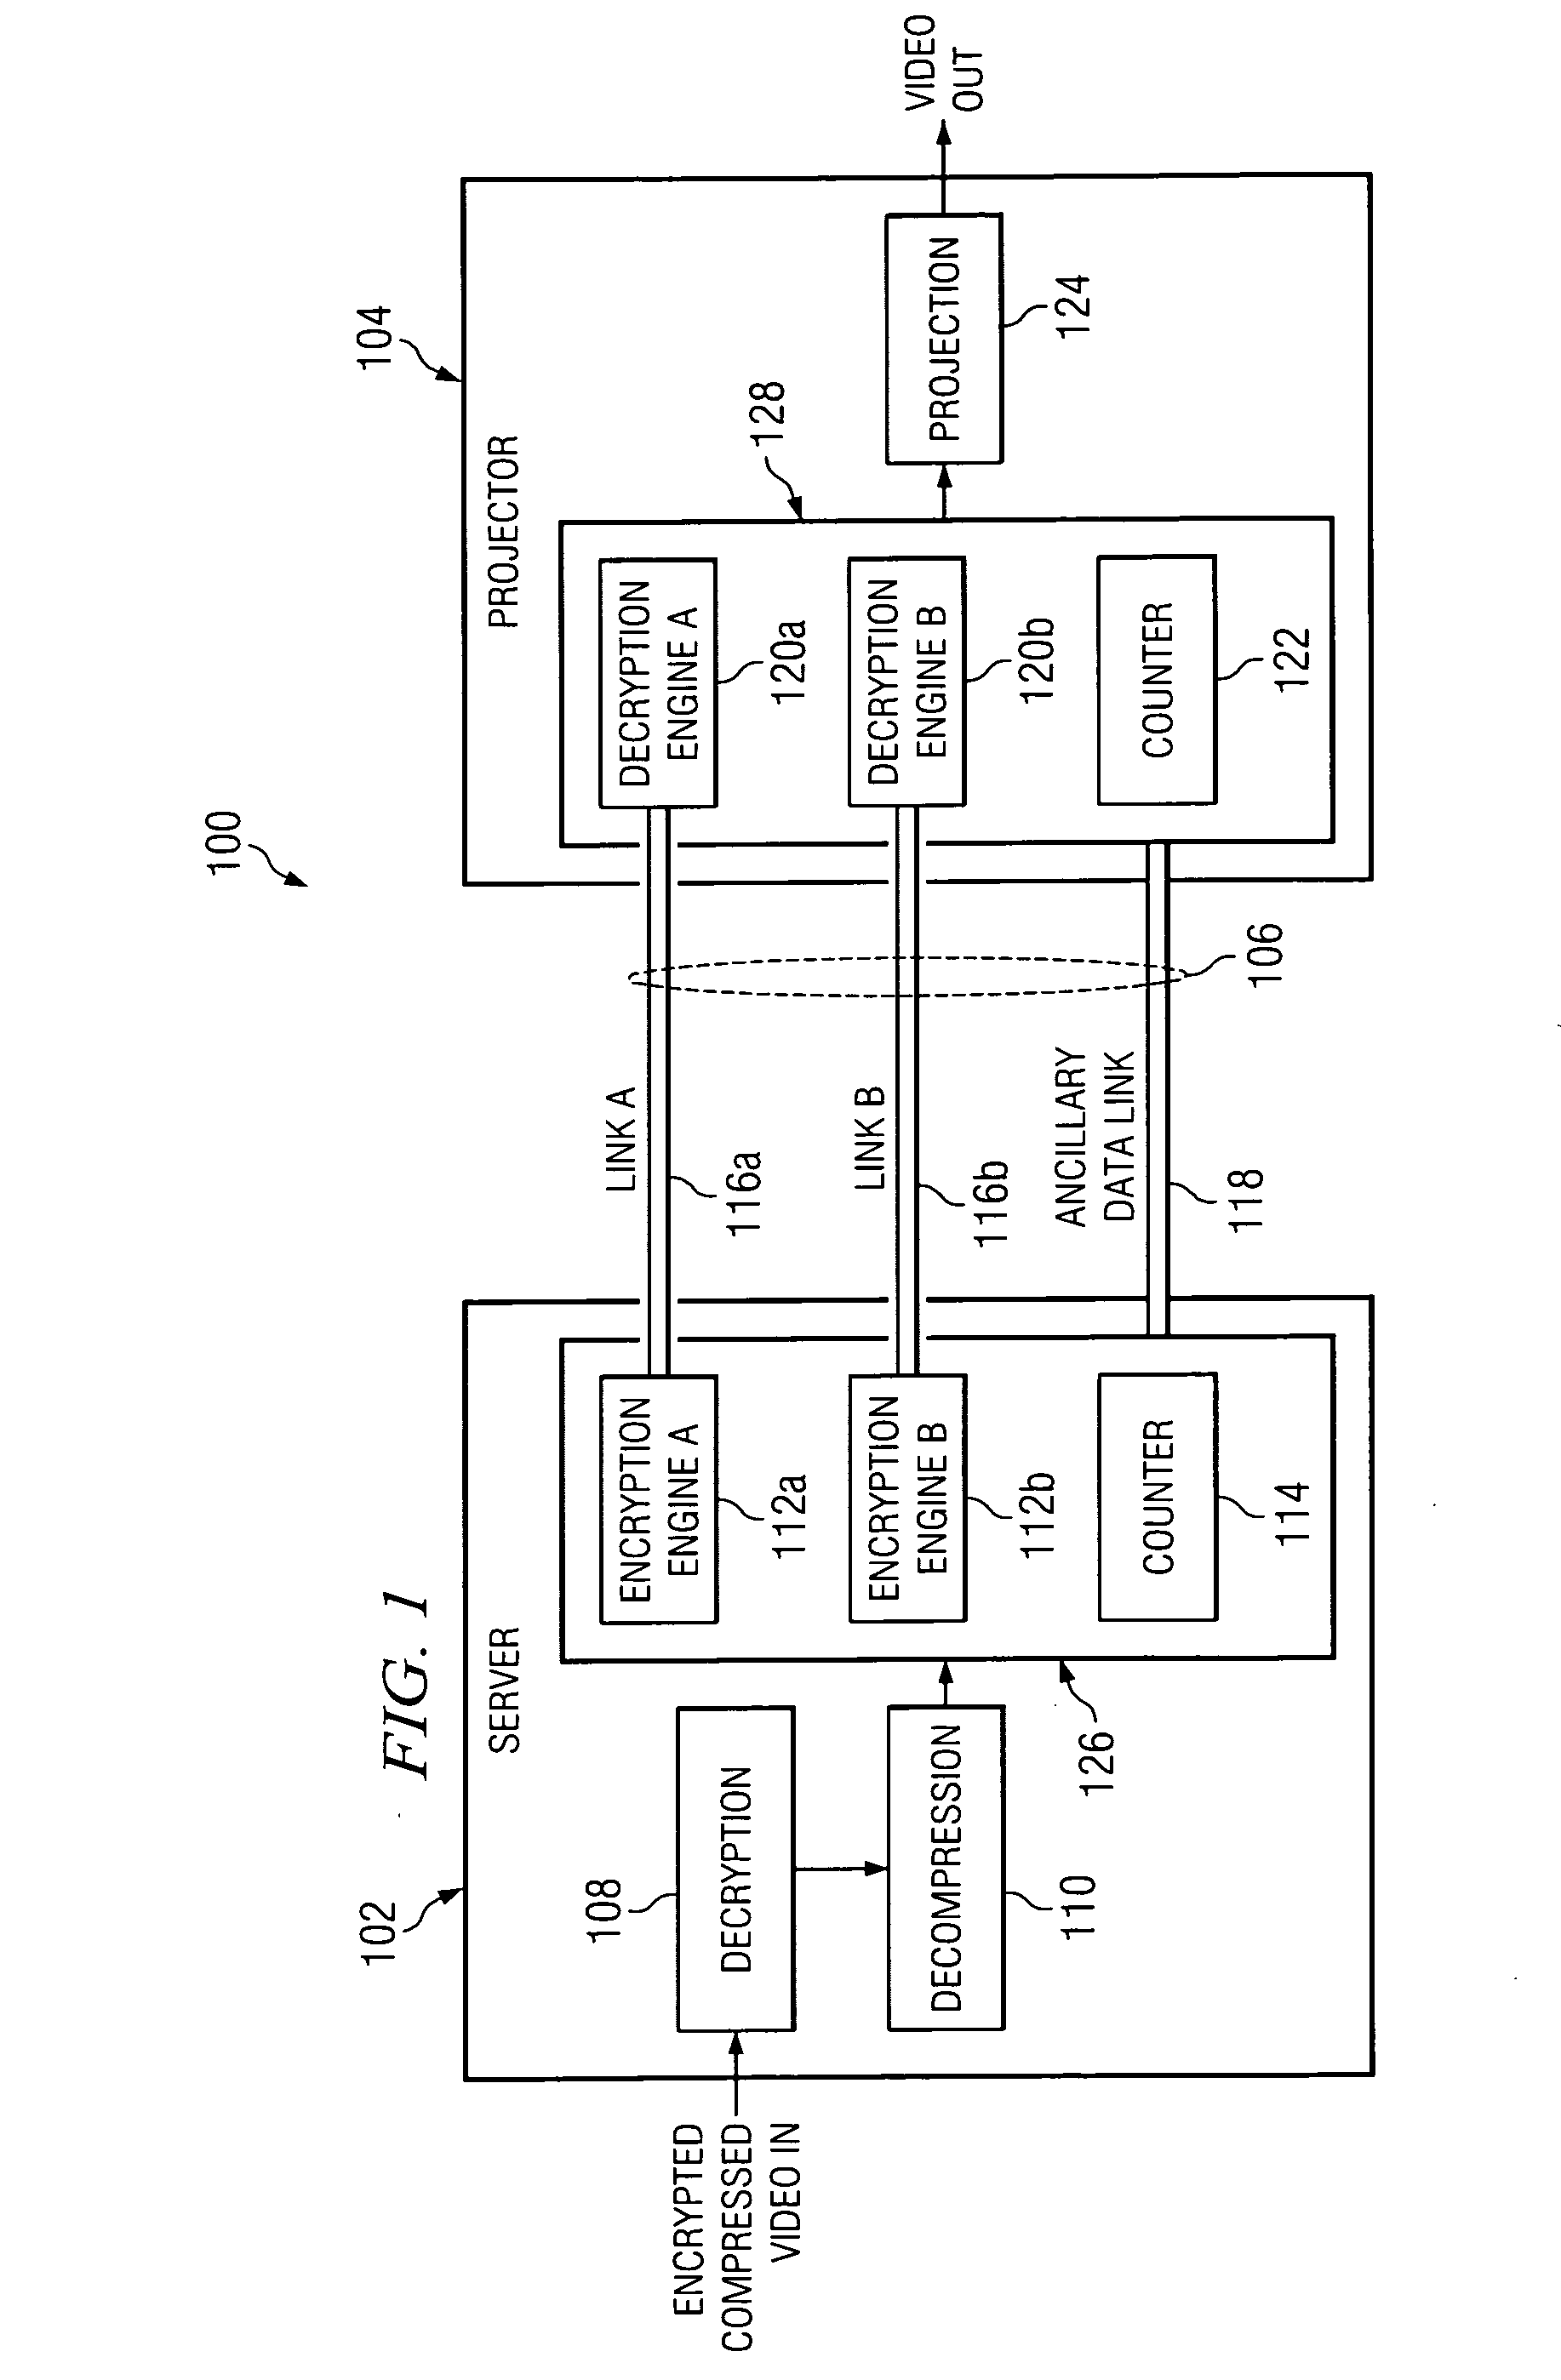 System and method for detecting AES random number generator synchronization errors